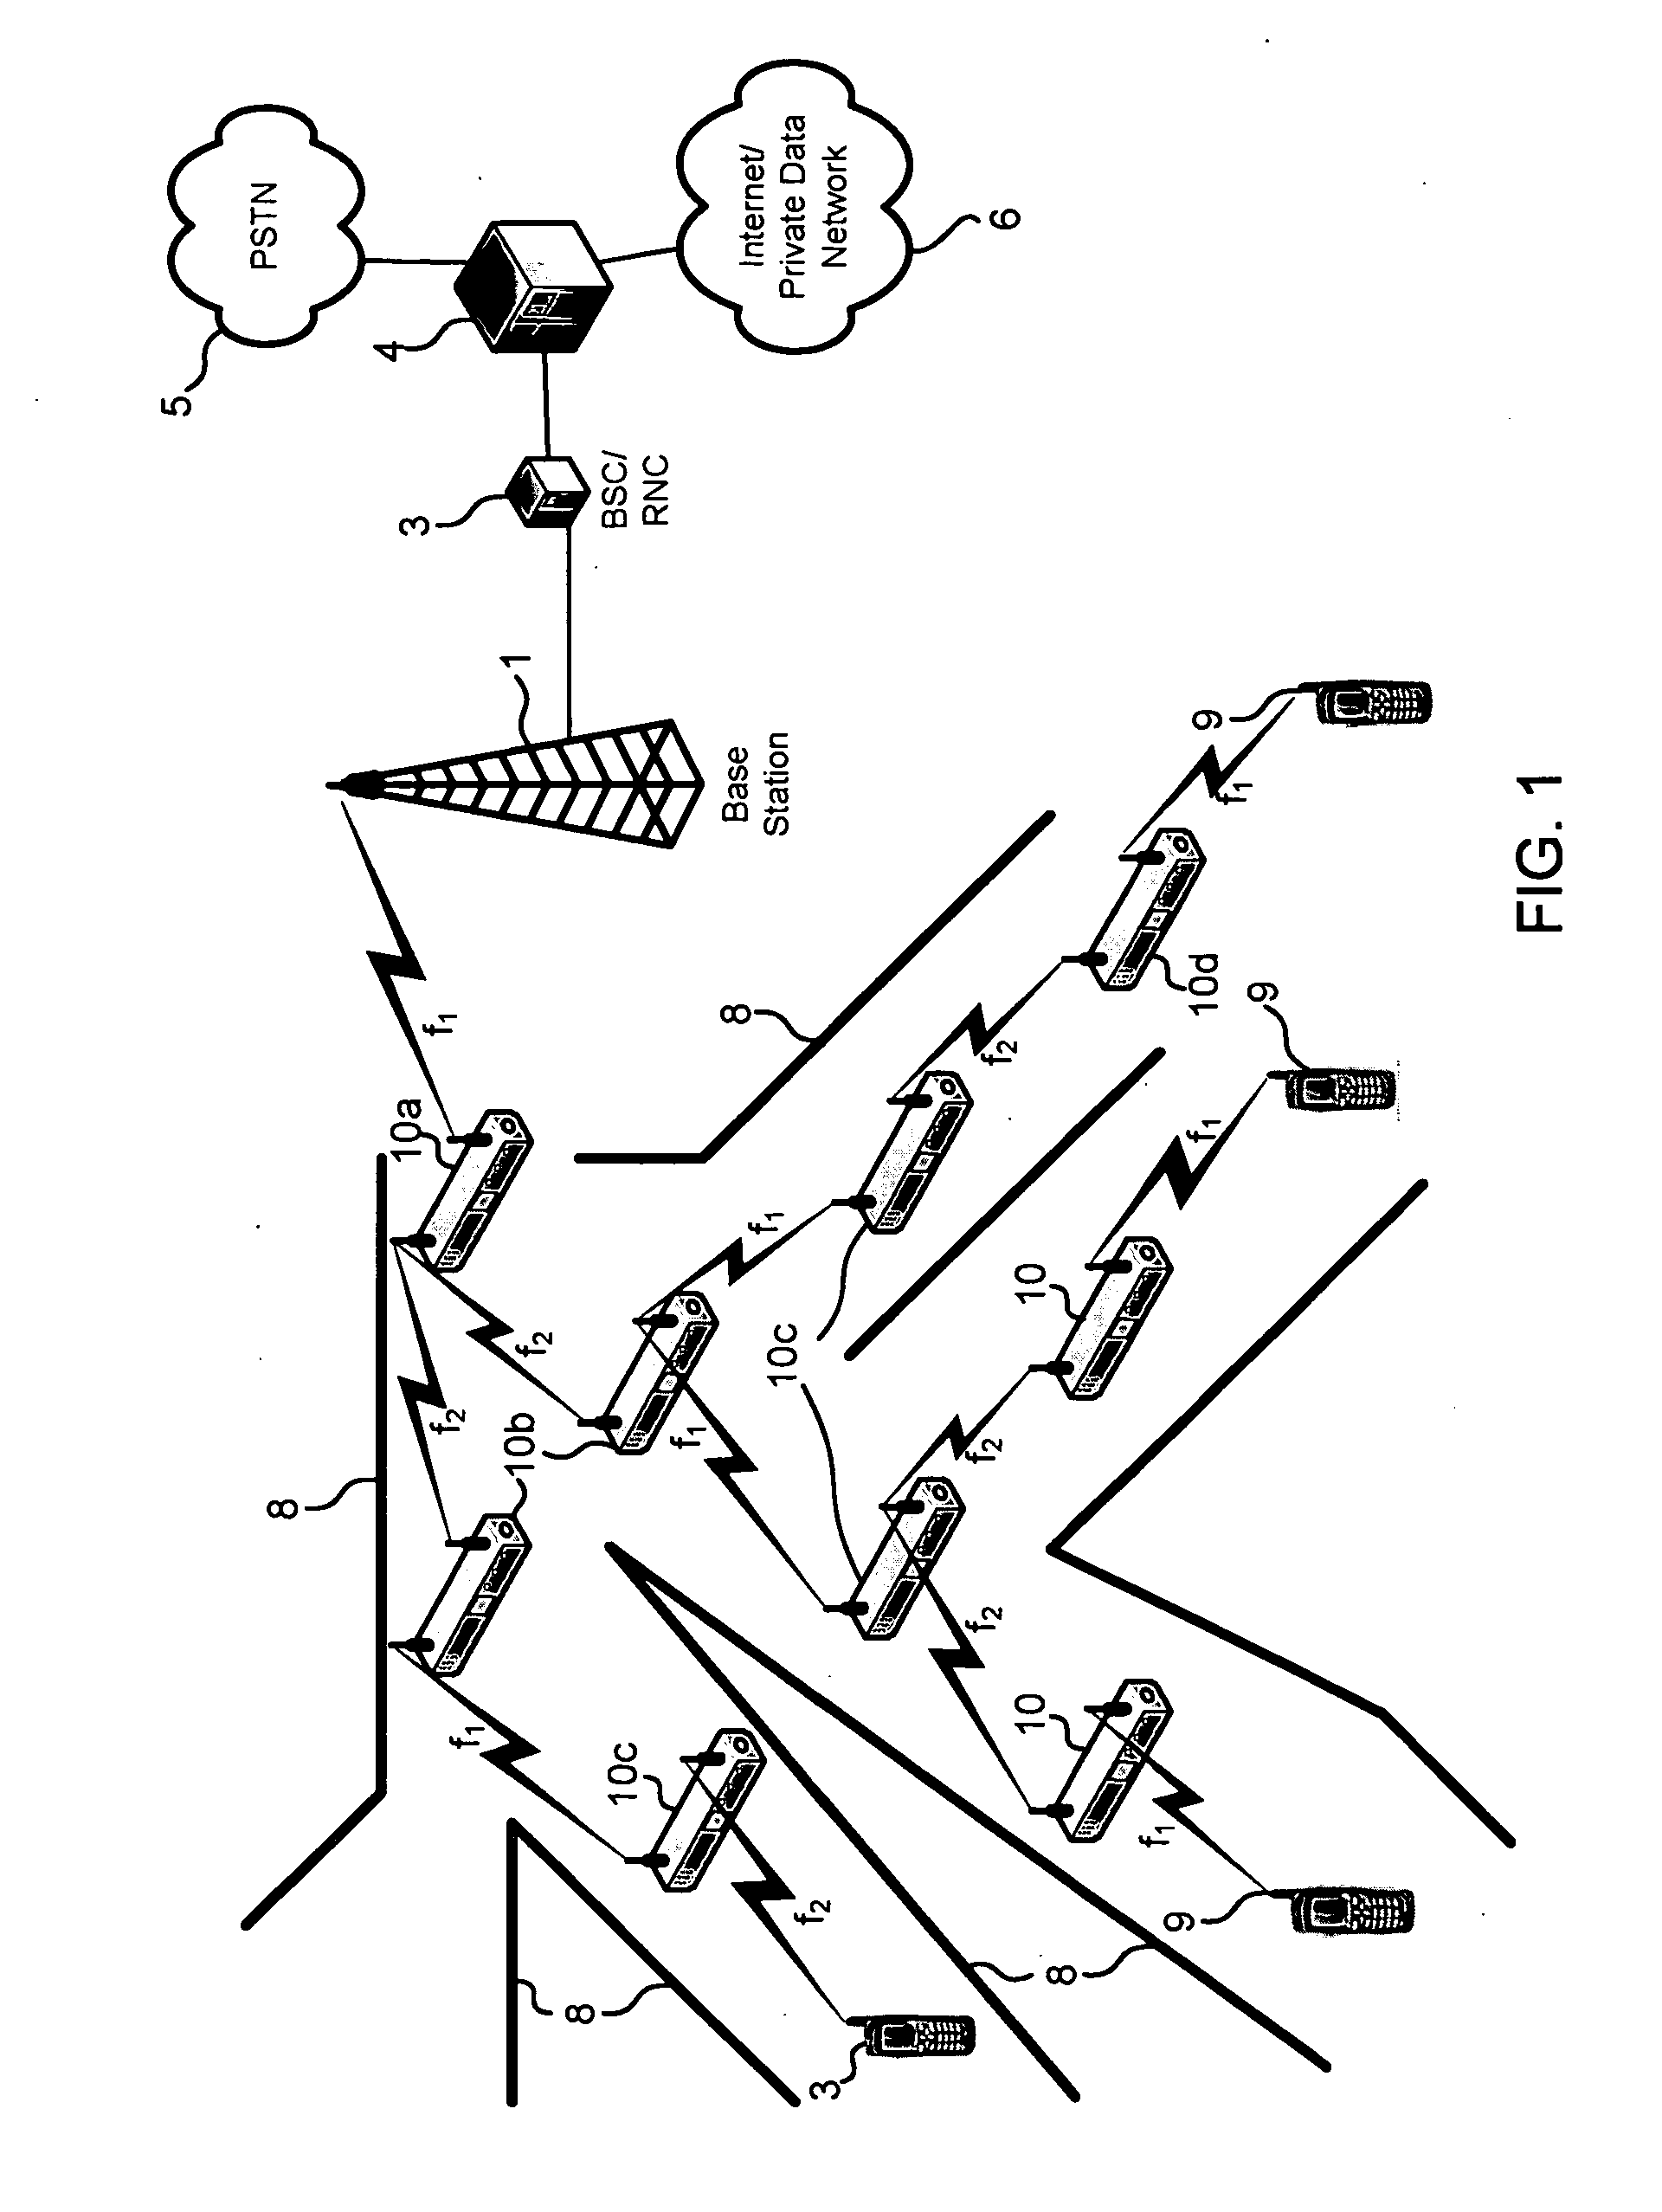 Explosion Proof Communications Relay and Communications System